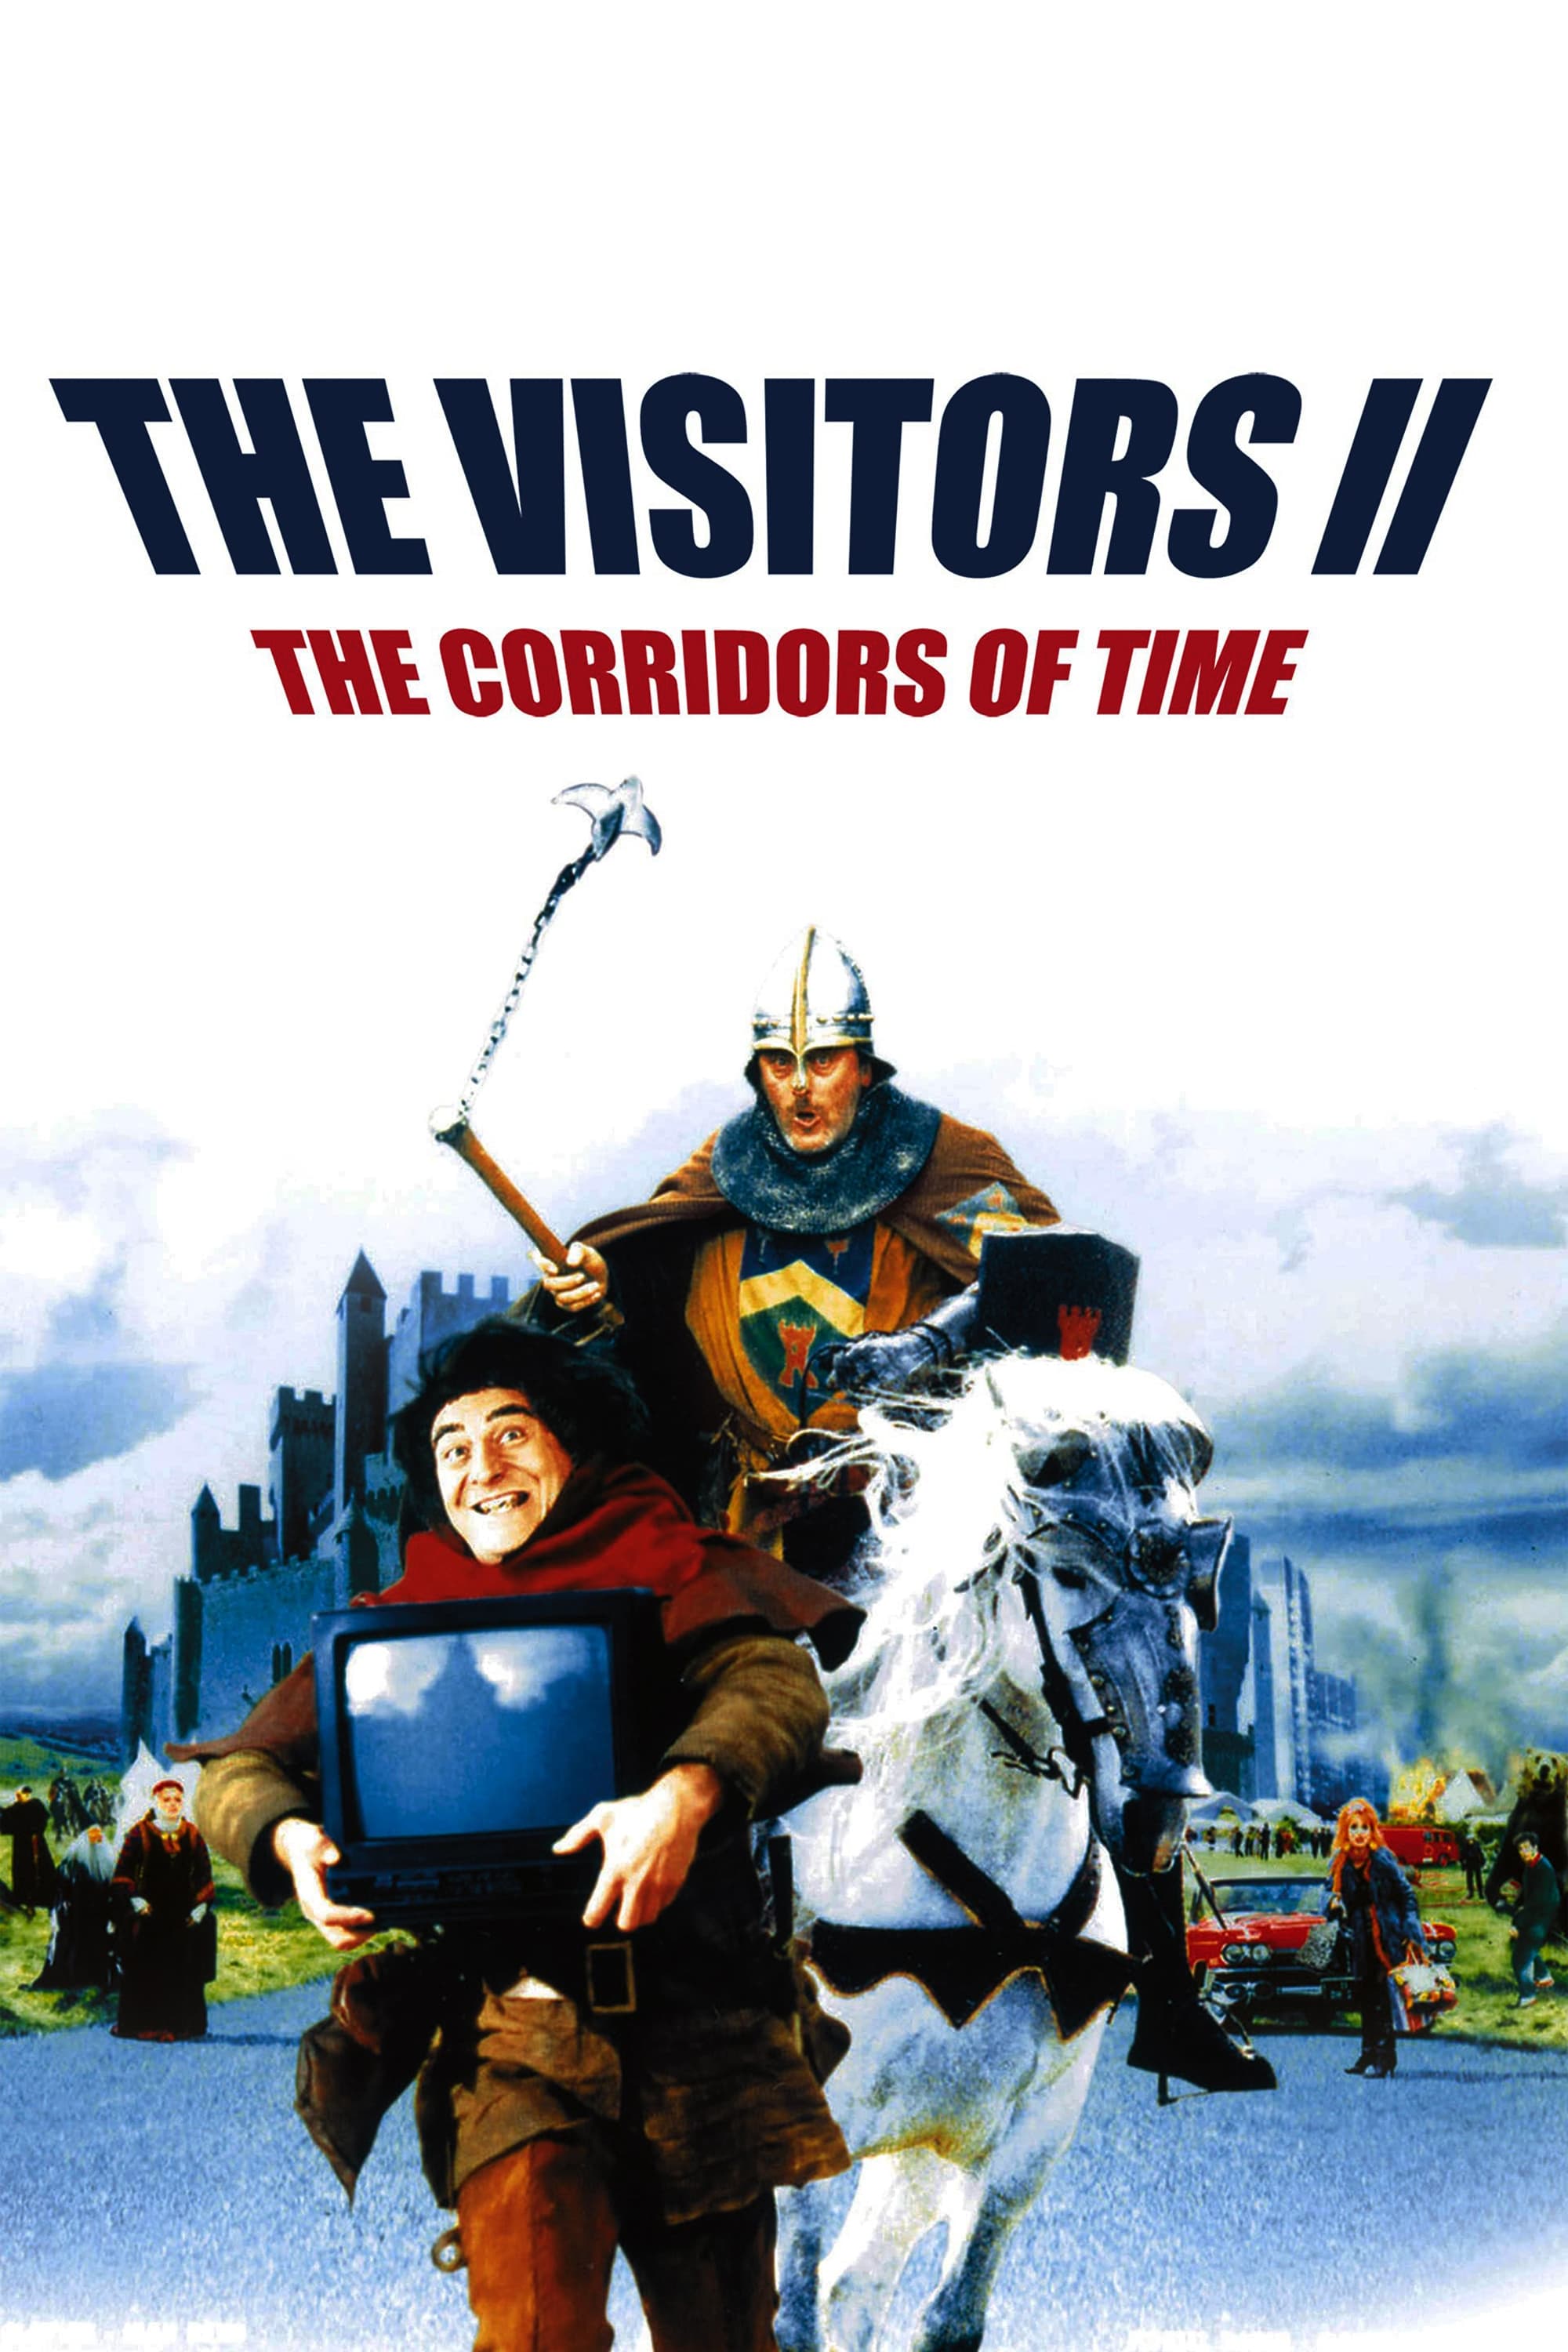 The Visitors II: The Corridors of Time (1998)